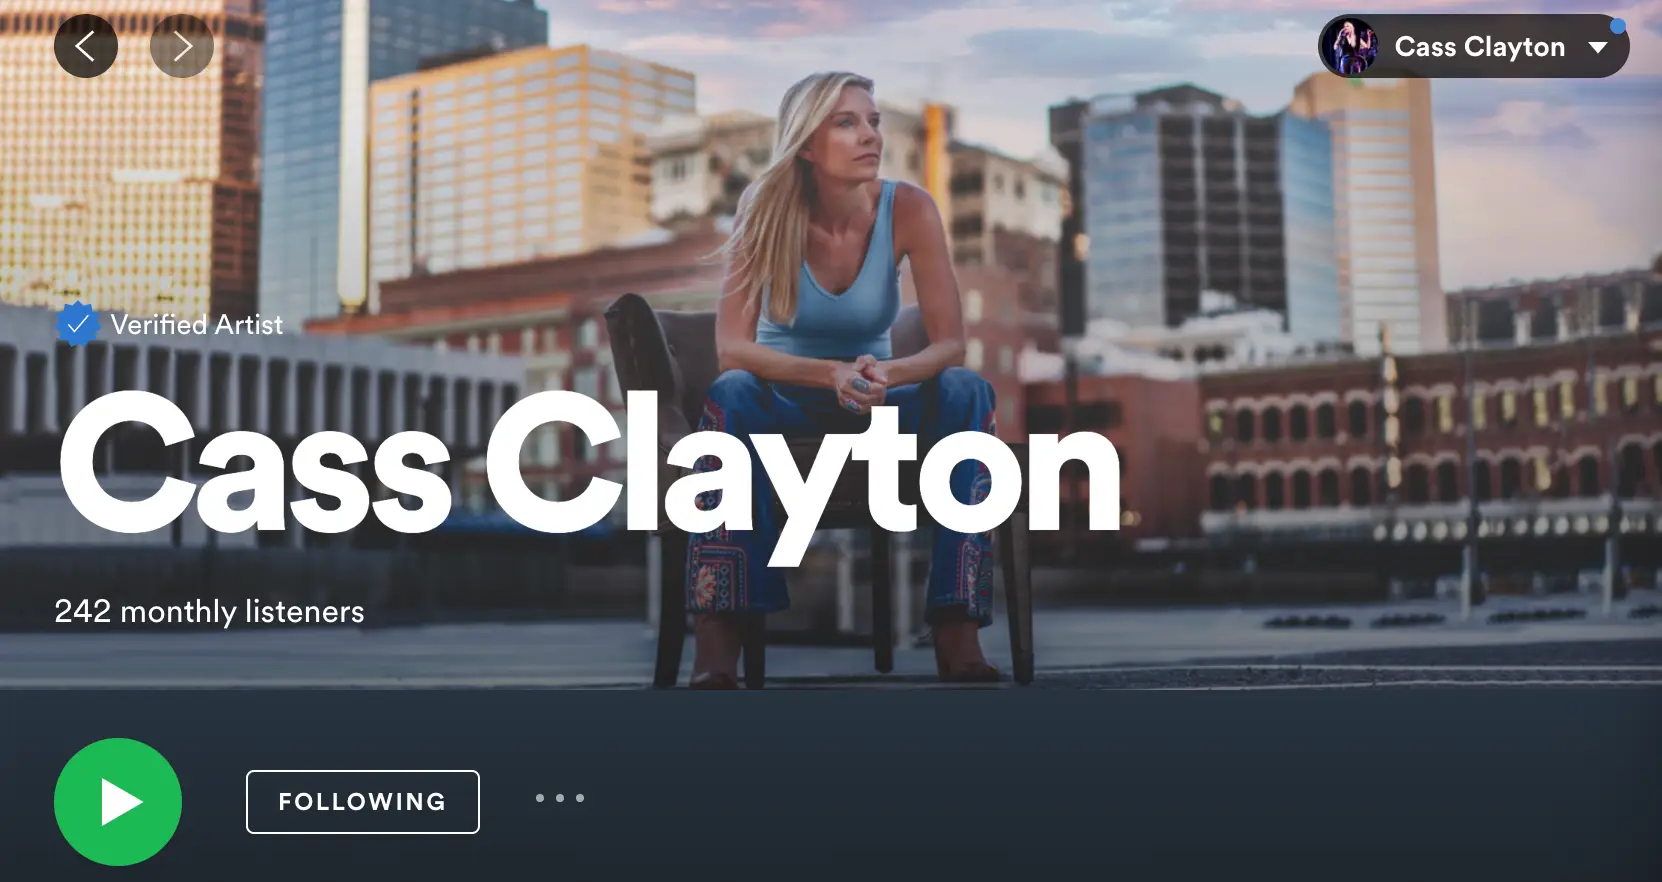 Cass Clayton Spotify channel landing page